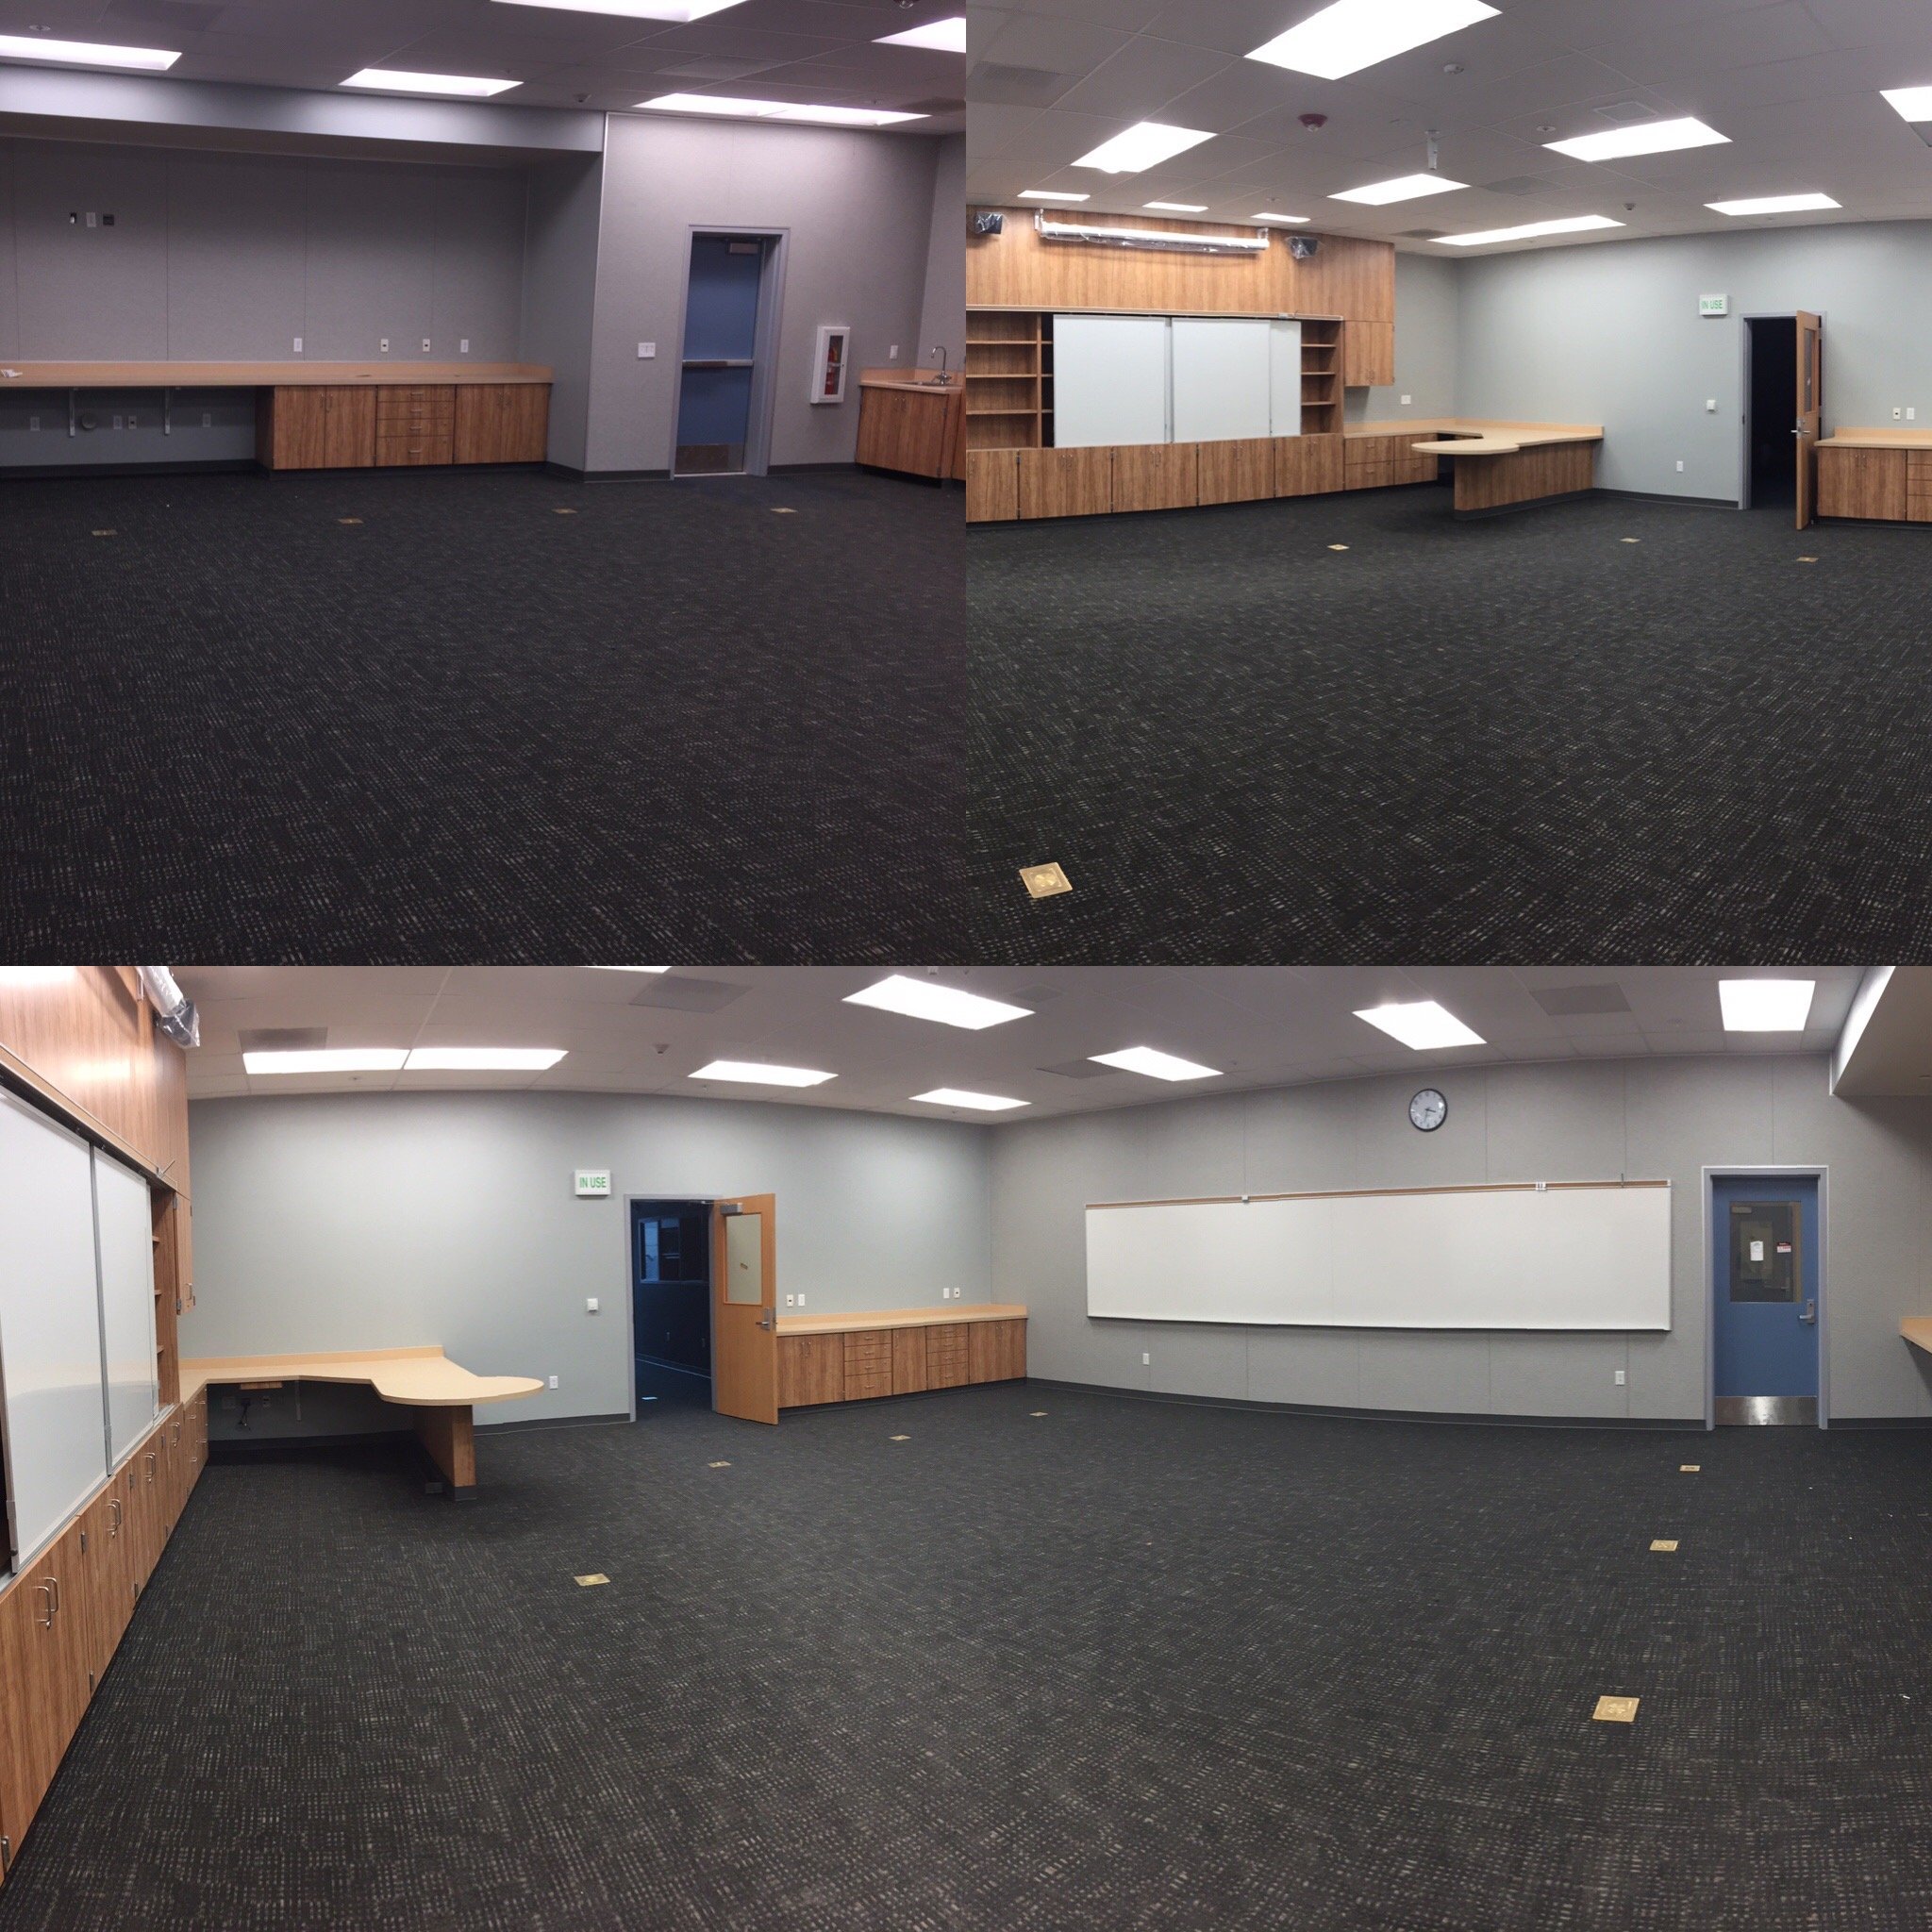  Everything was a totally blank slate to build something that was custom-fitted for exactly what the students needed.  